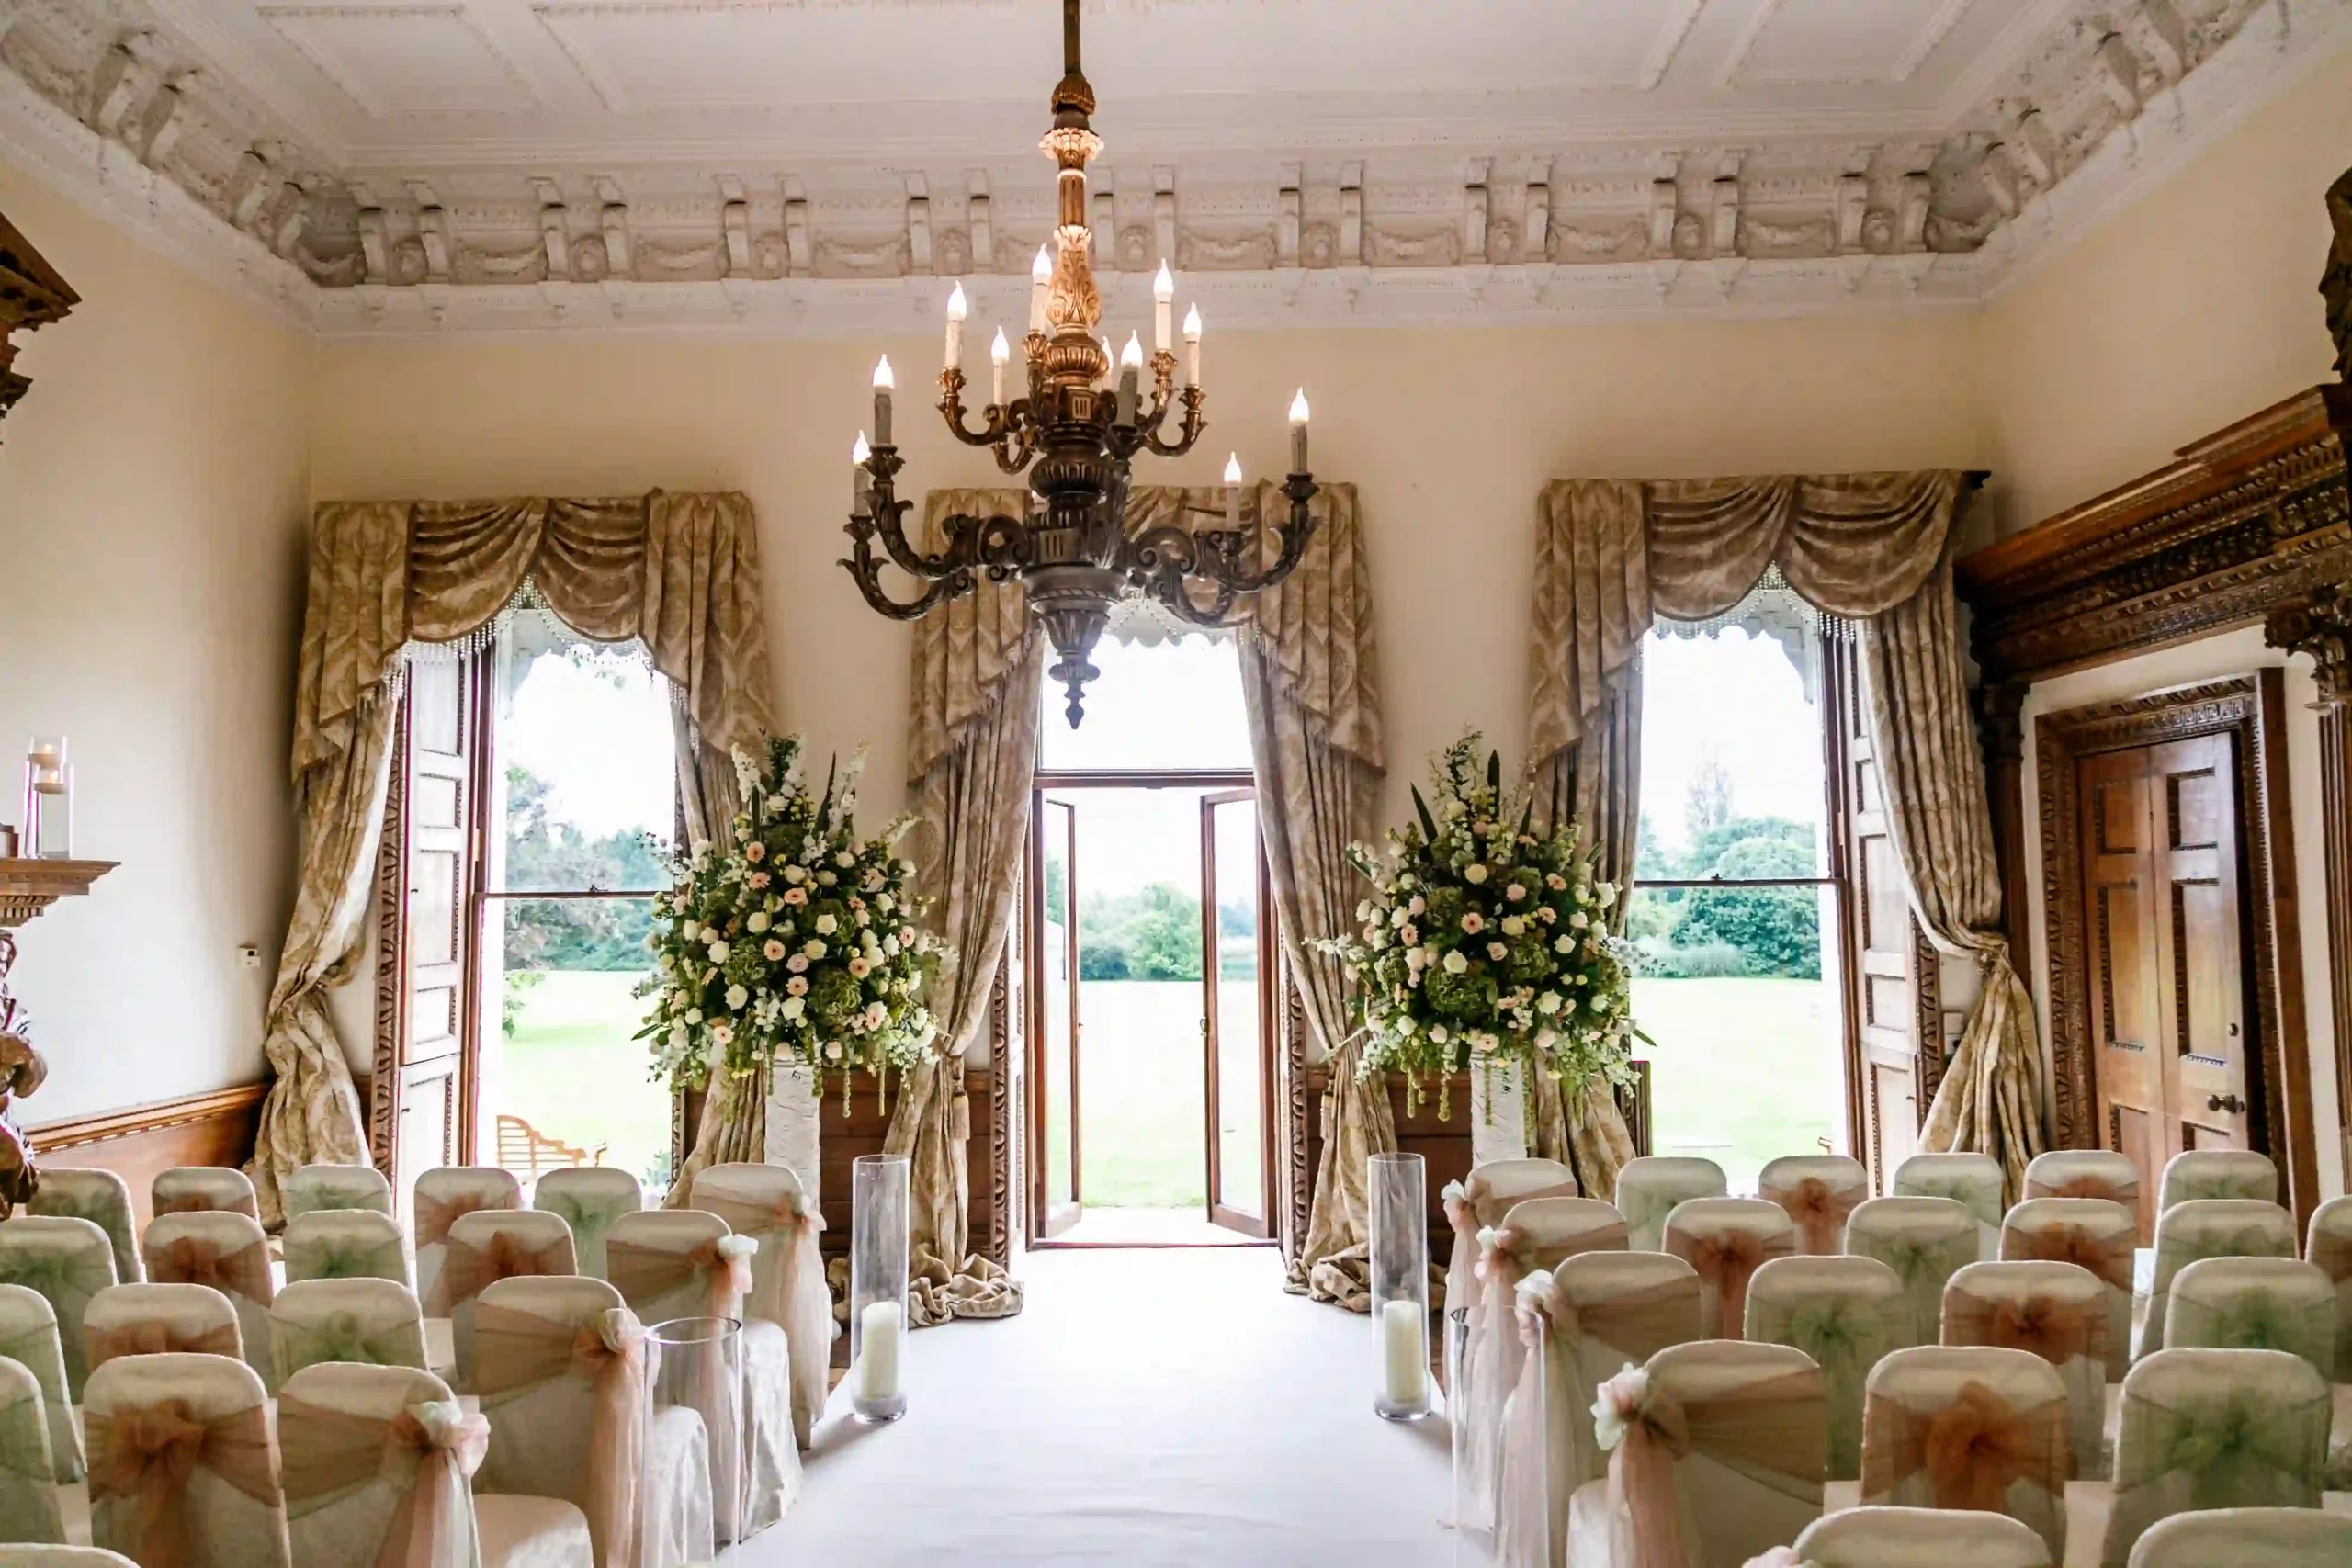 Ceremony venue at Boreham House with elegant chandelier in centre, and rows of dress chairs